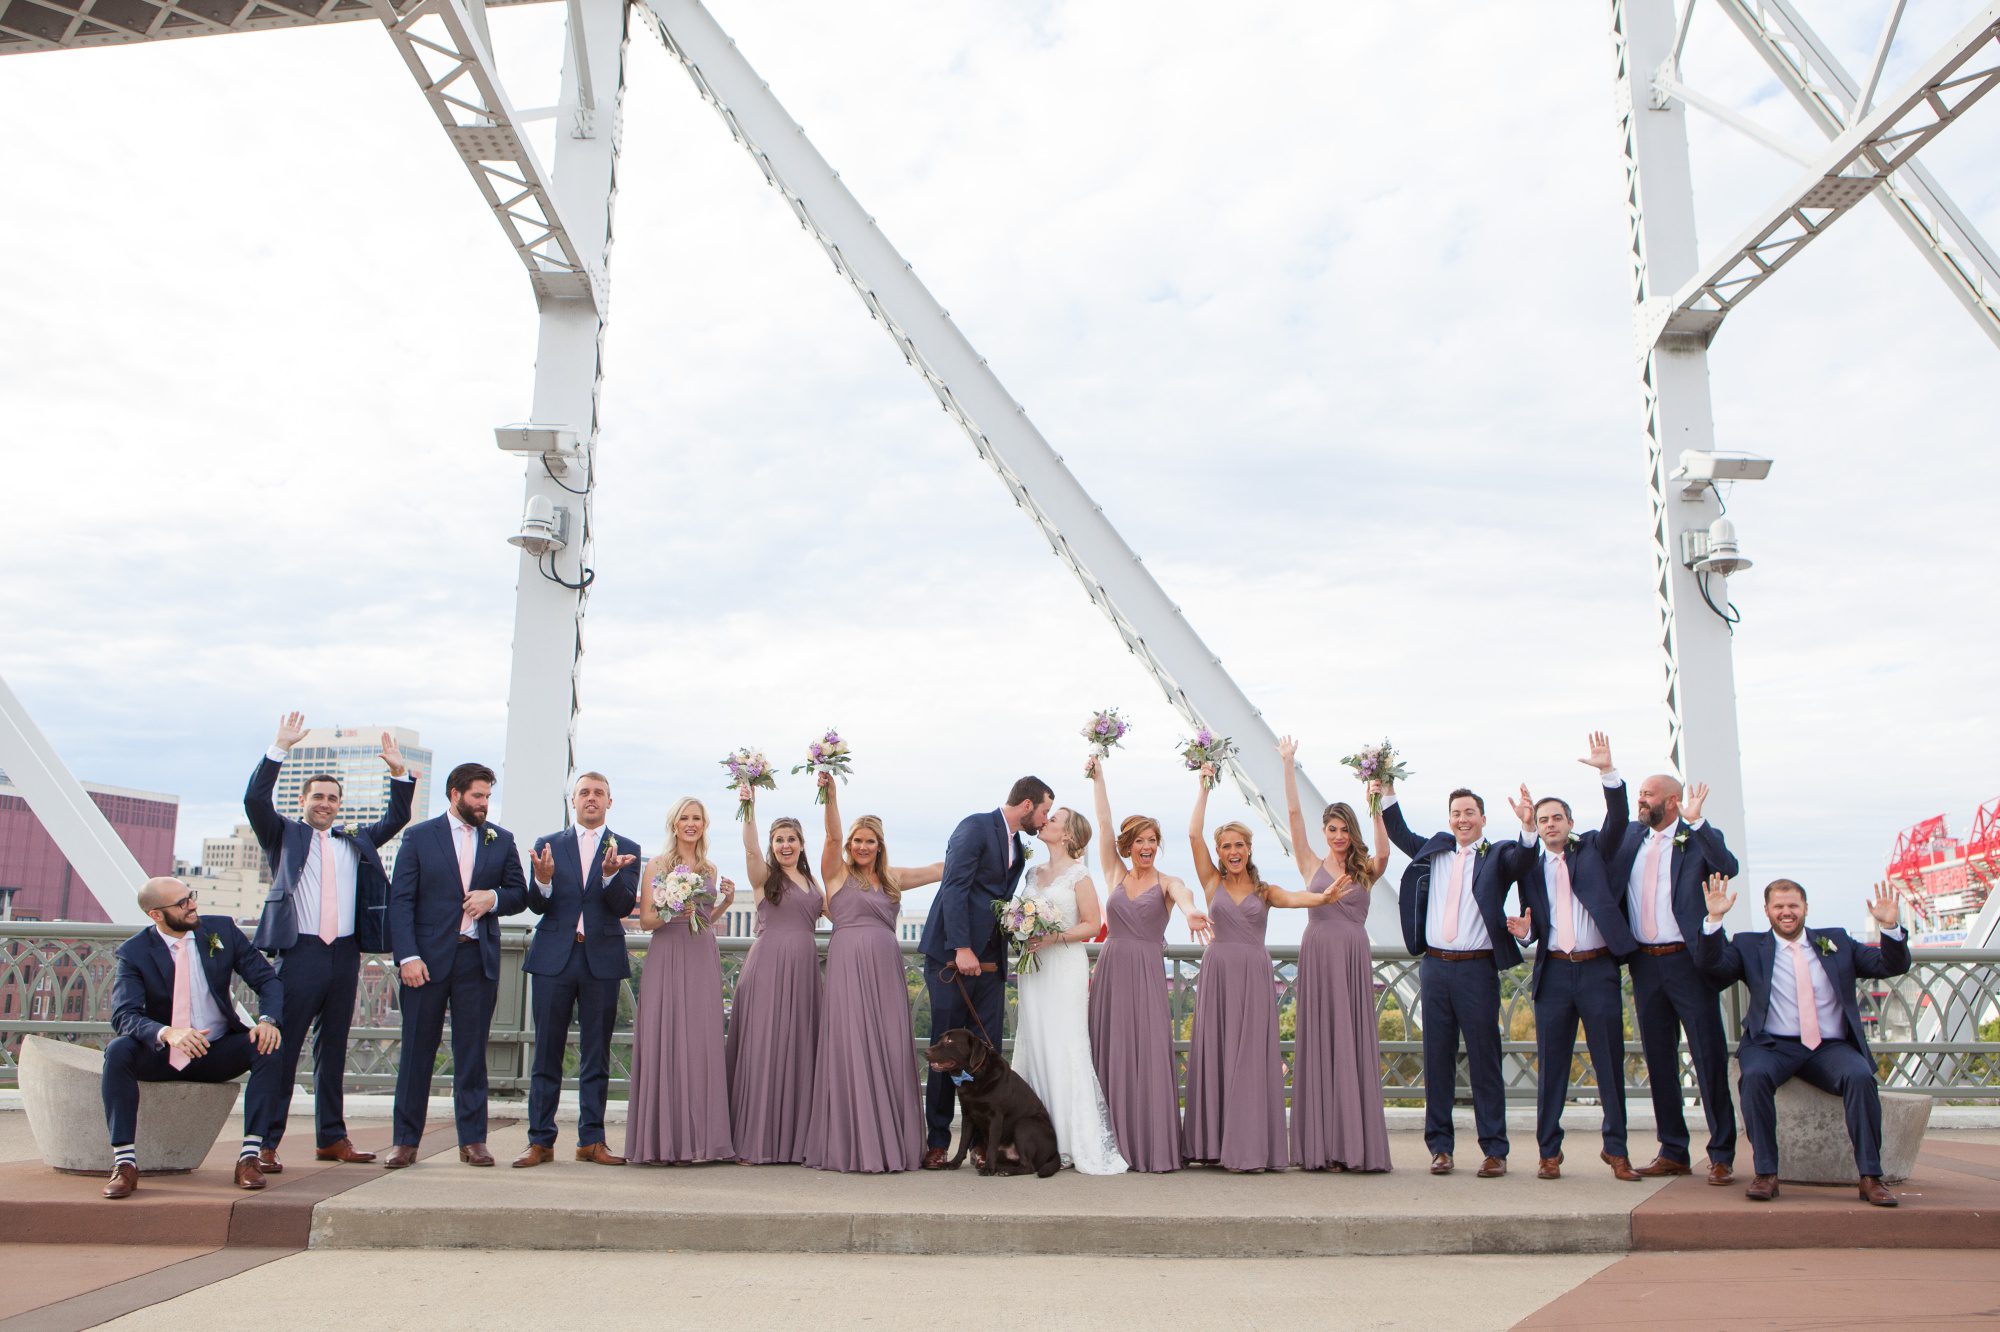 Bridal party photos up on Pedestrian bridge before wedding photography at Musicians Hall of Fame in Nashville TN photos by Krista Lee 